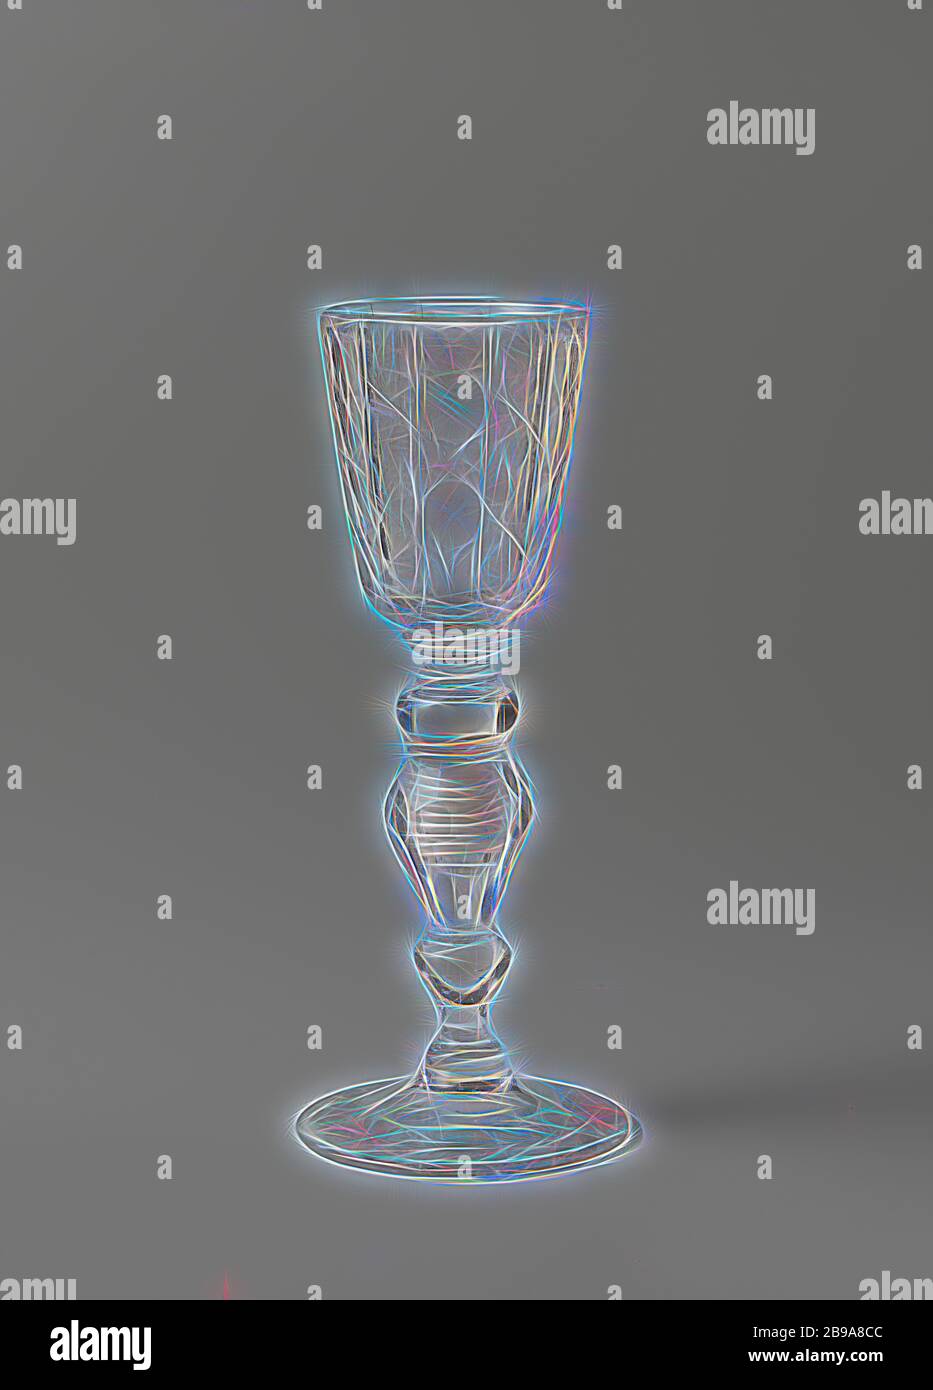 Cup with sunflowers, vines and circles, Vaulted foot. The trunk has a smooth and a facet-cut baluster, a knot and seven discs. Conical faceted cut with facet cut, rounded bottom. The trunk consists of two parts screwed together. At the bottom of the chalice a stylized leafy branch, on which three vertical bands, each composed of a strip of two sunflowers between two strips of grapes. The three bands are separated from each other by narrow strips with four circles. A continuous flower branch on the foot., anonymous, Bohemen, c. 1700 - c. 1725, glass, glassblowing, h 27.5 cm × d 11.3 cm, Reimagi Stock Photo